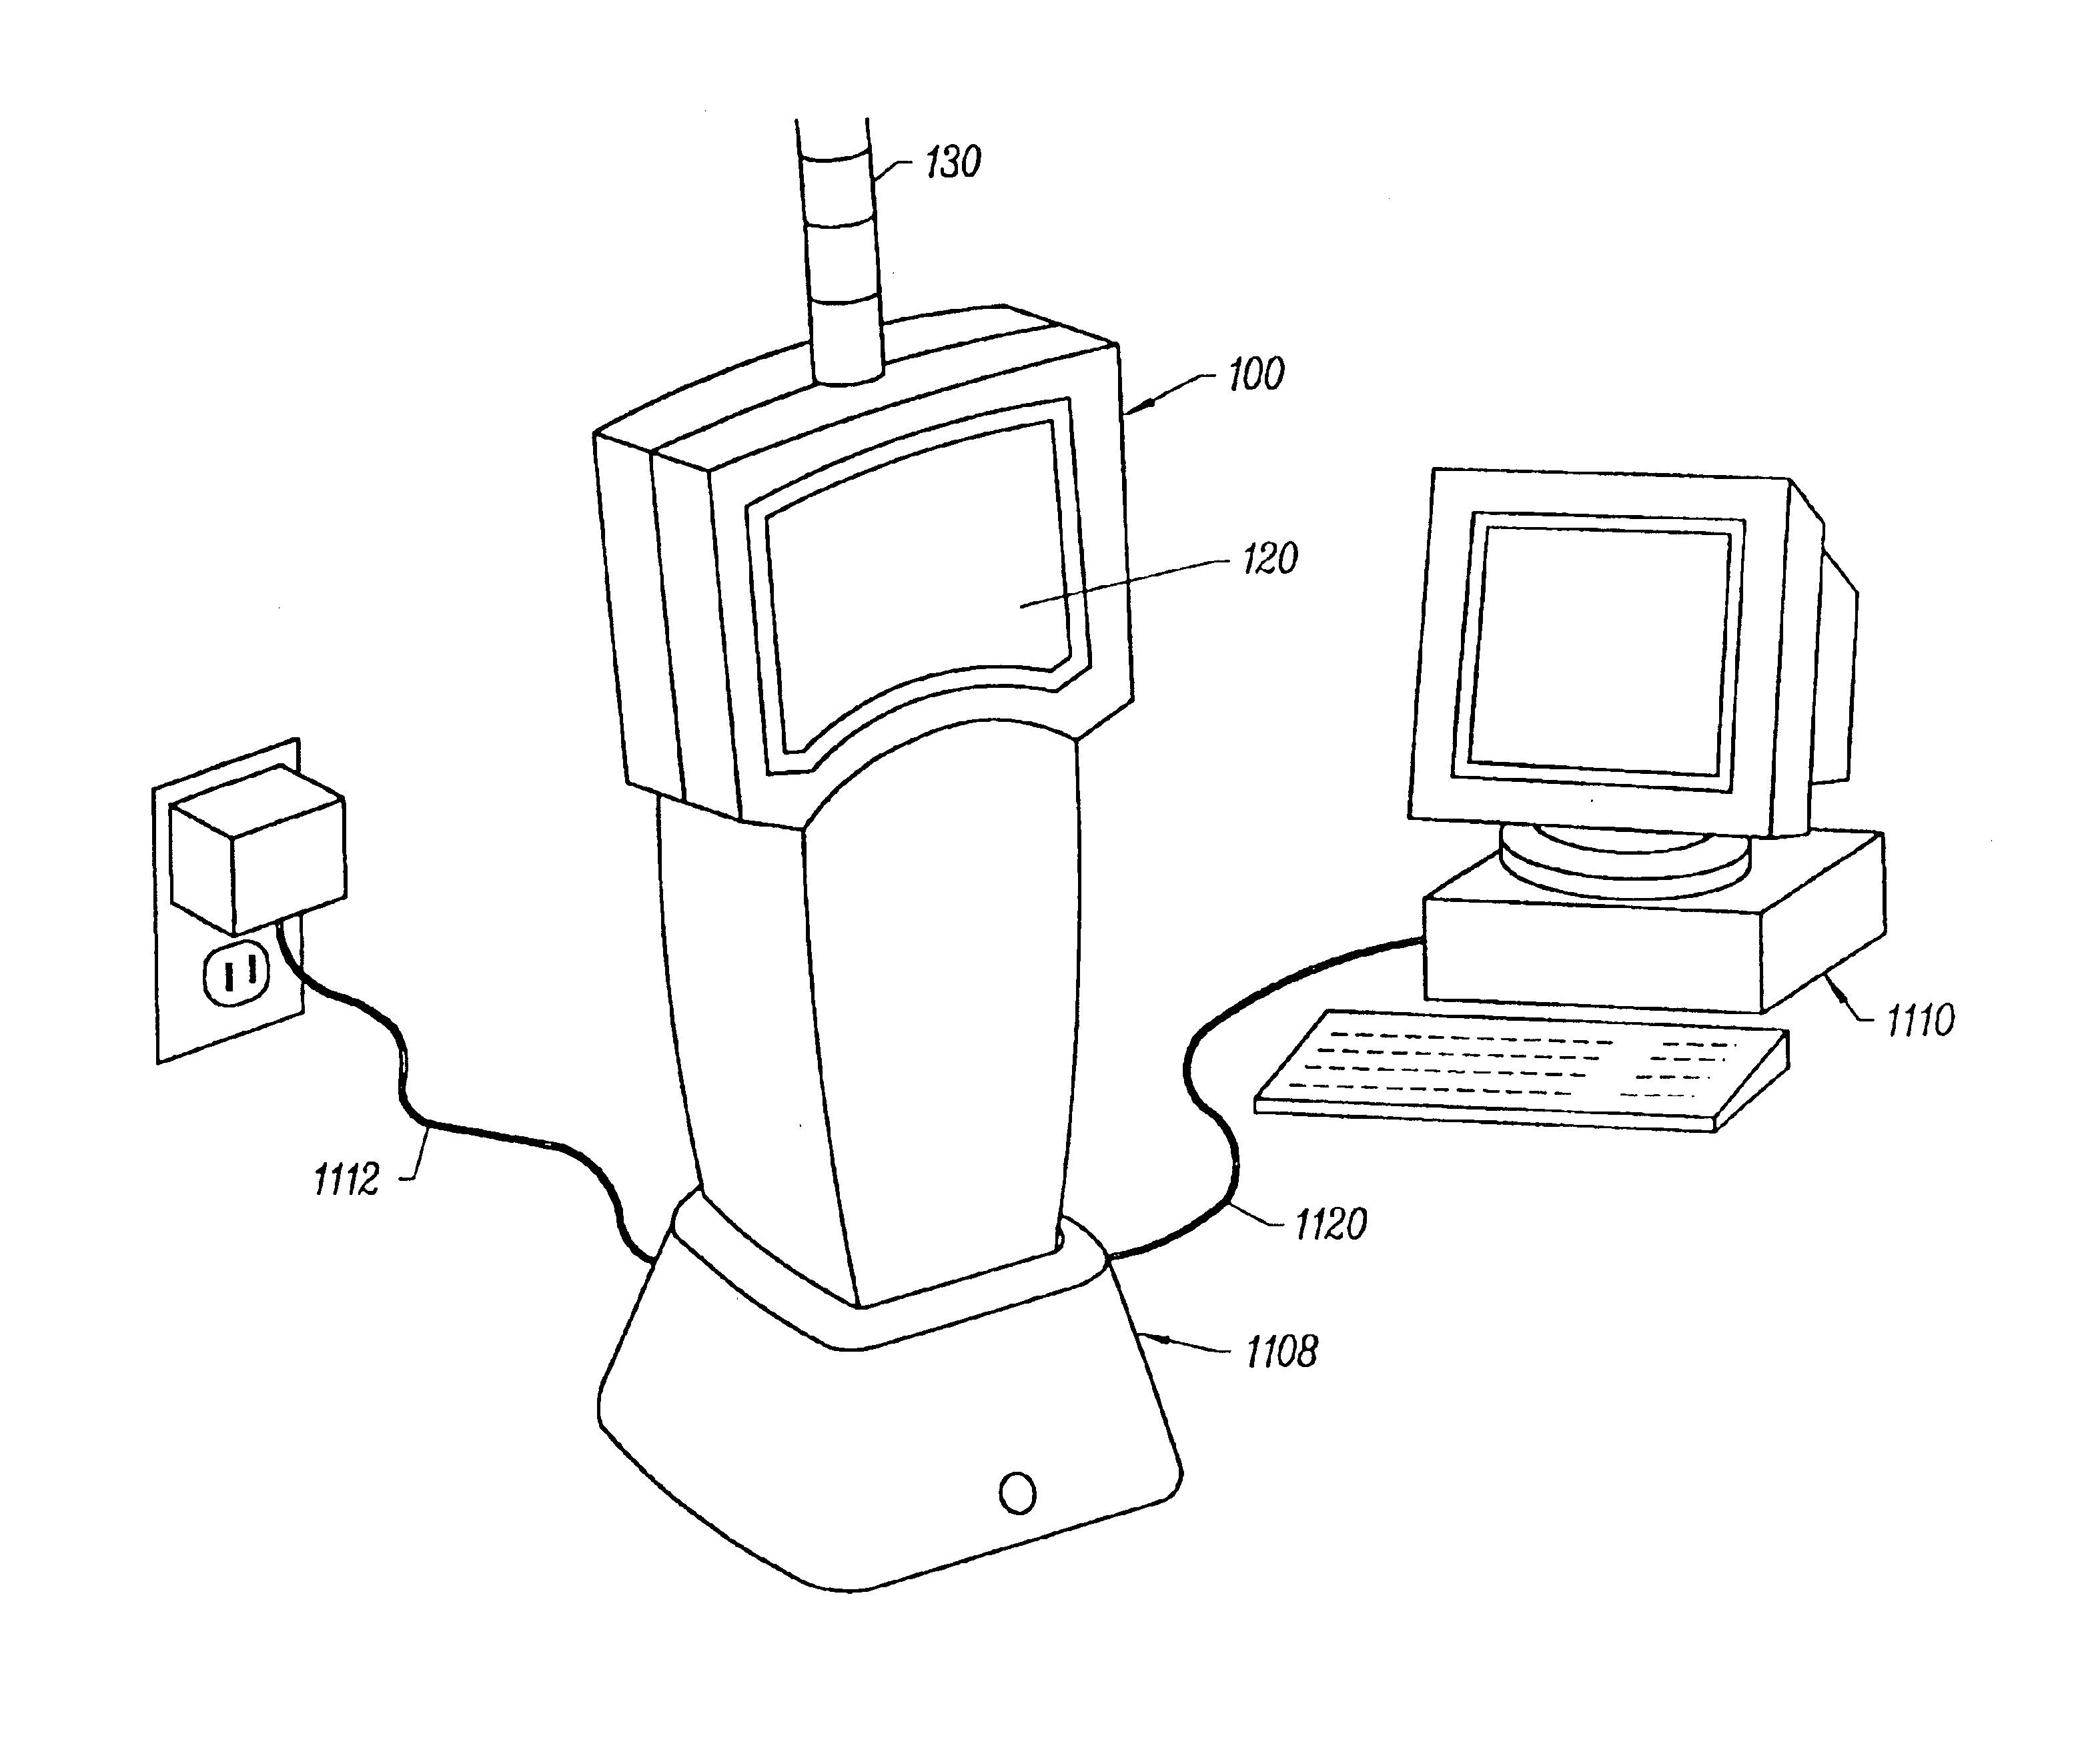 Apparatus, systems and methods for detecting and transmitting sensory data over a computer network